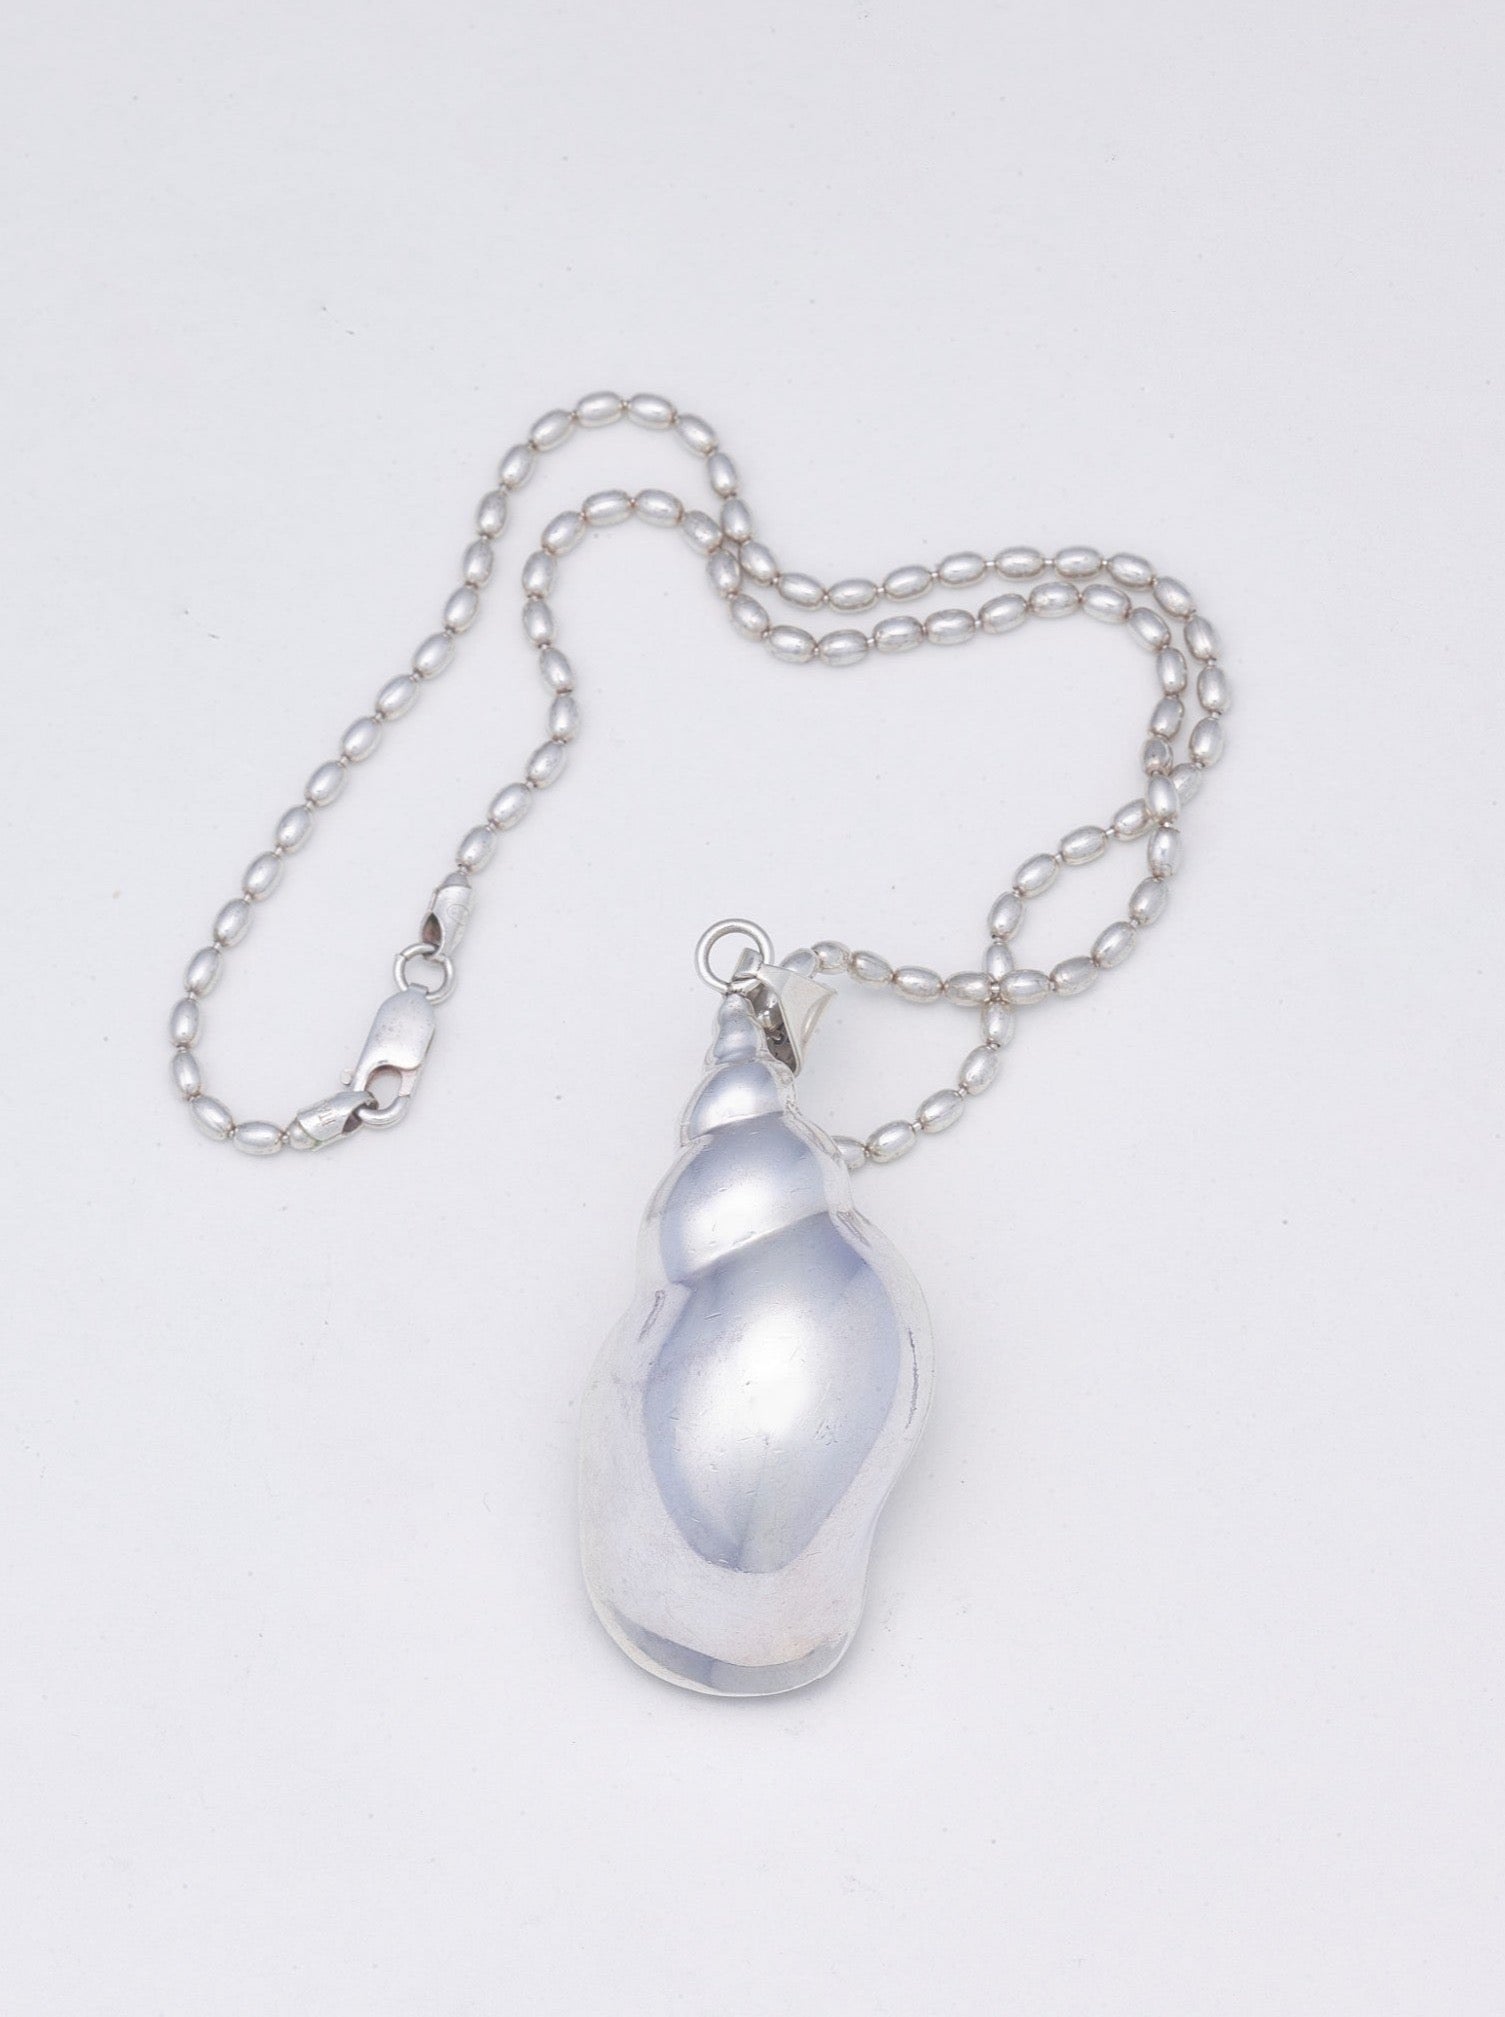 Large Shell Motif Pendant with Necklace